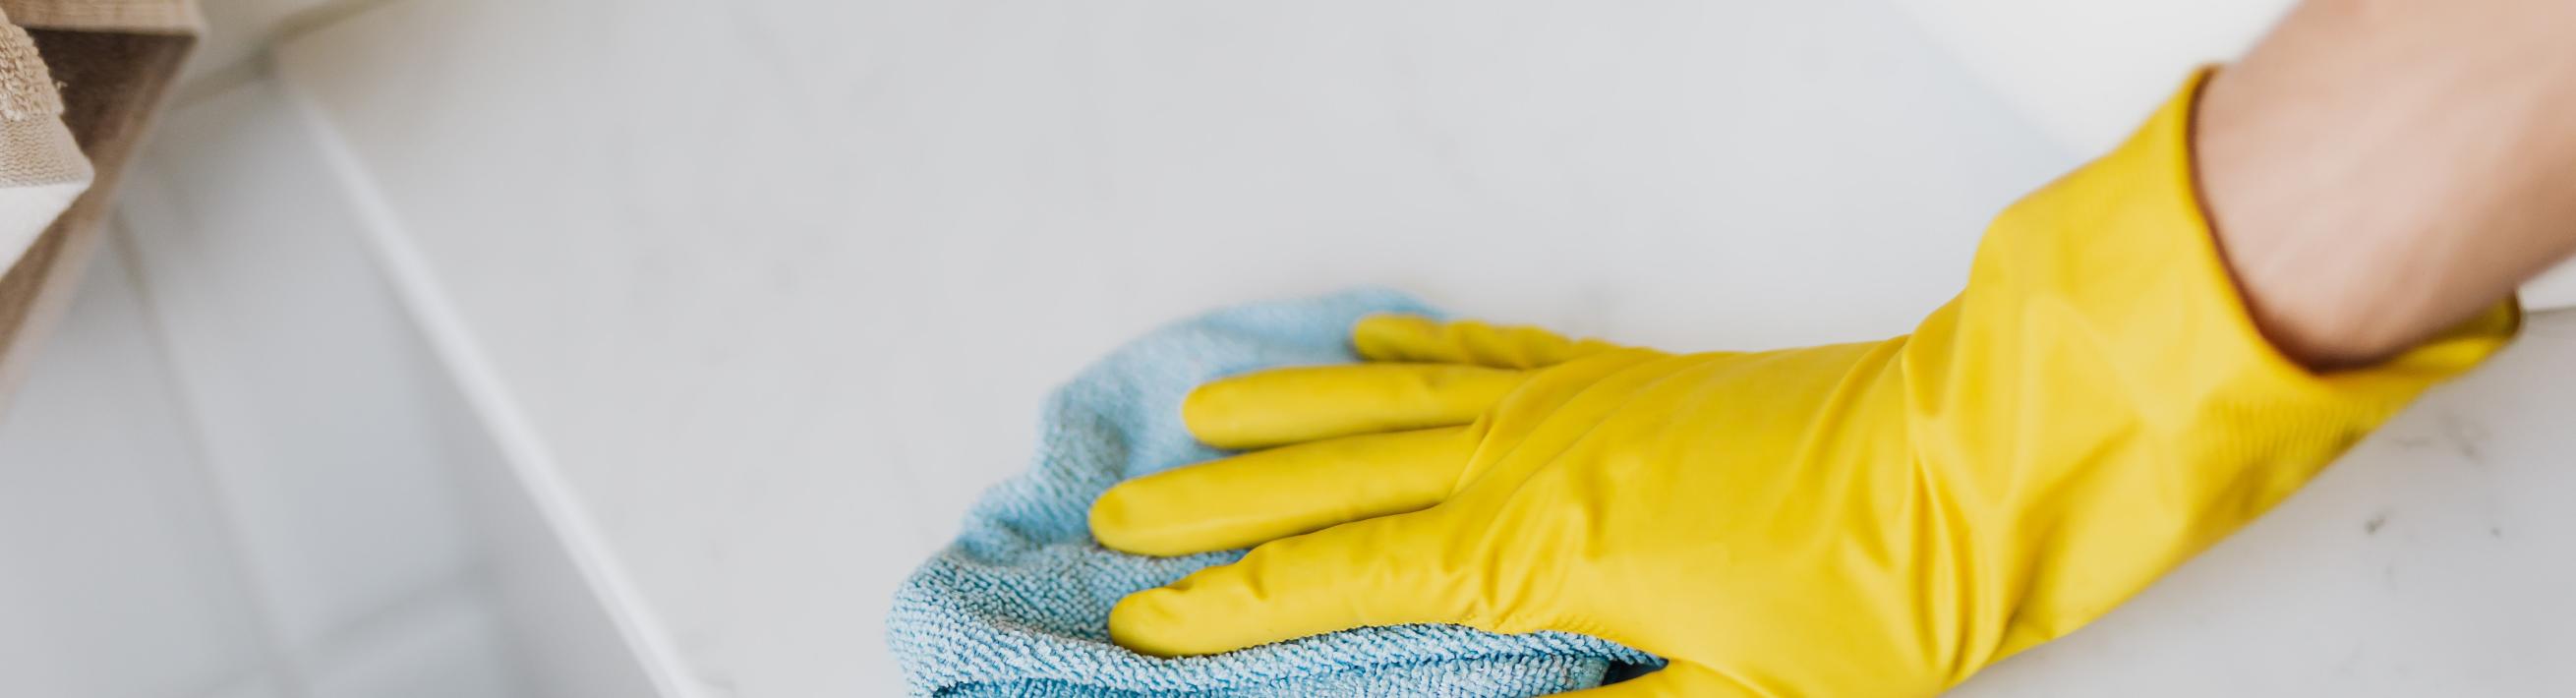 A gloved hand using a rag to clean a white surface.